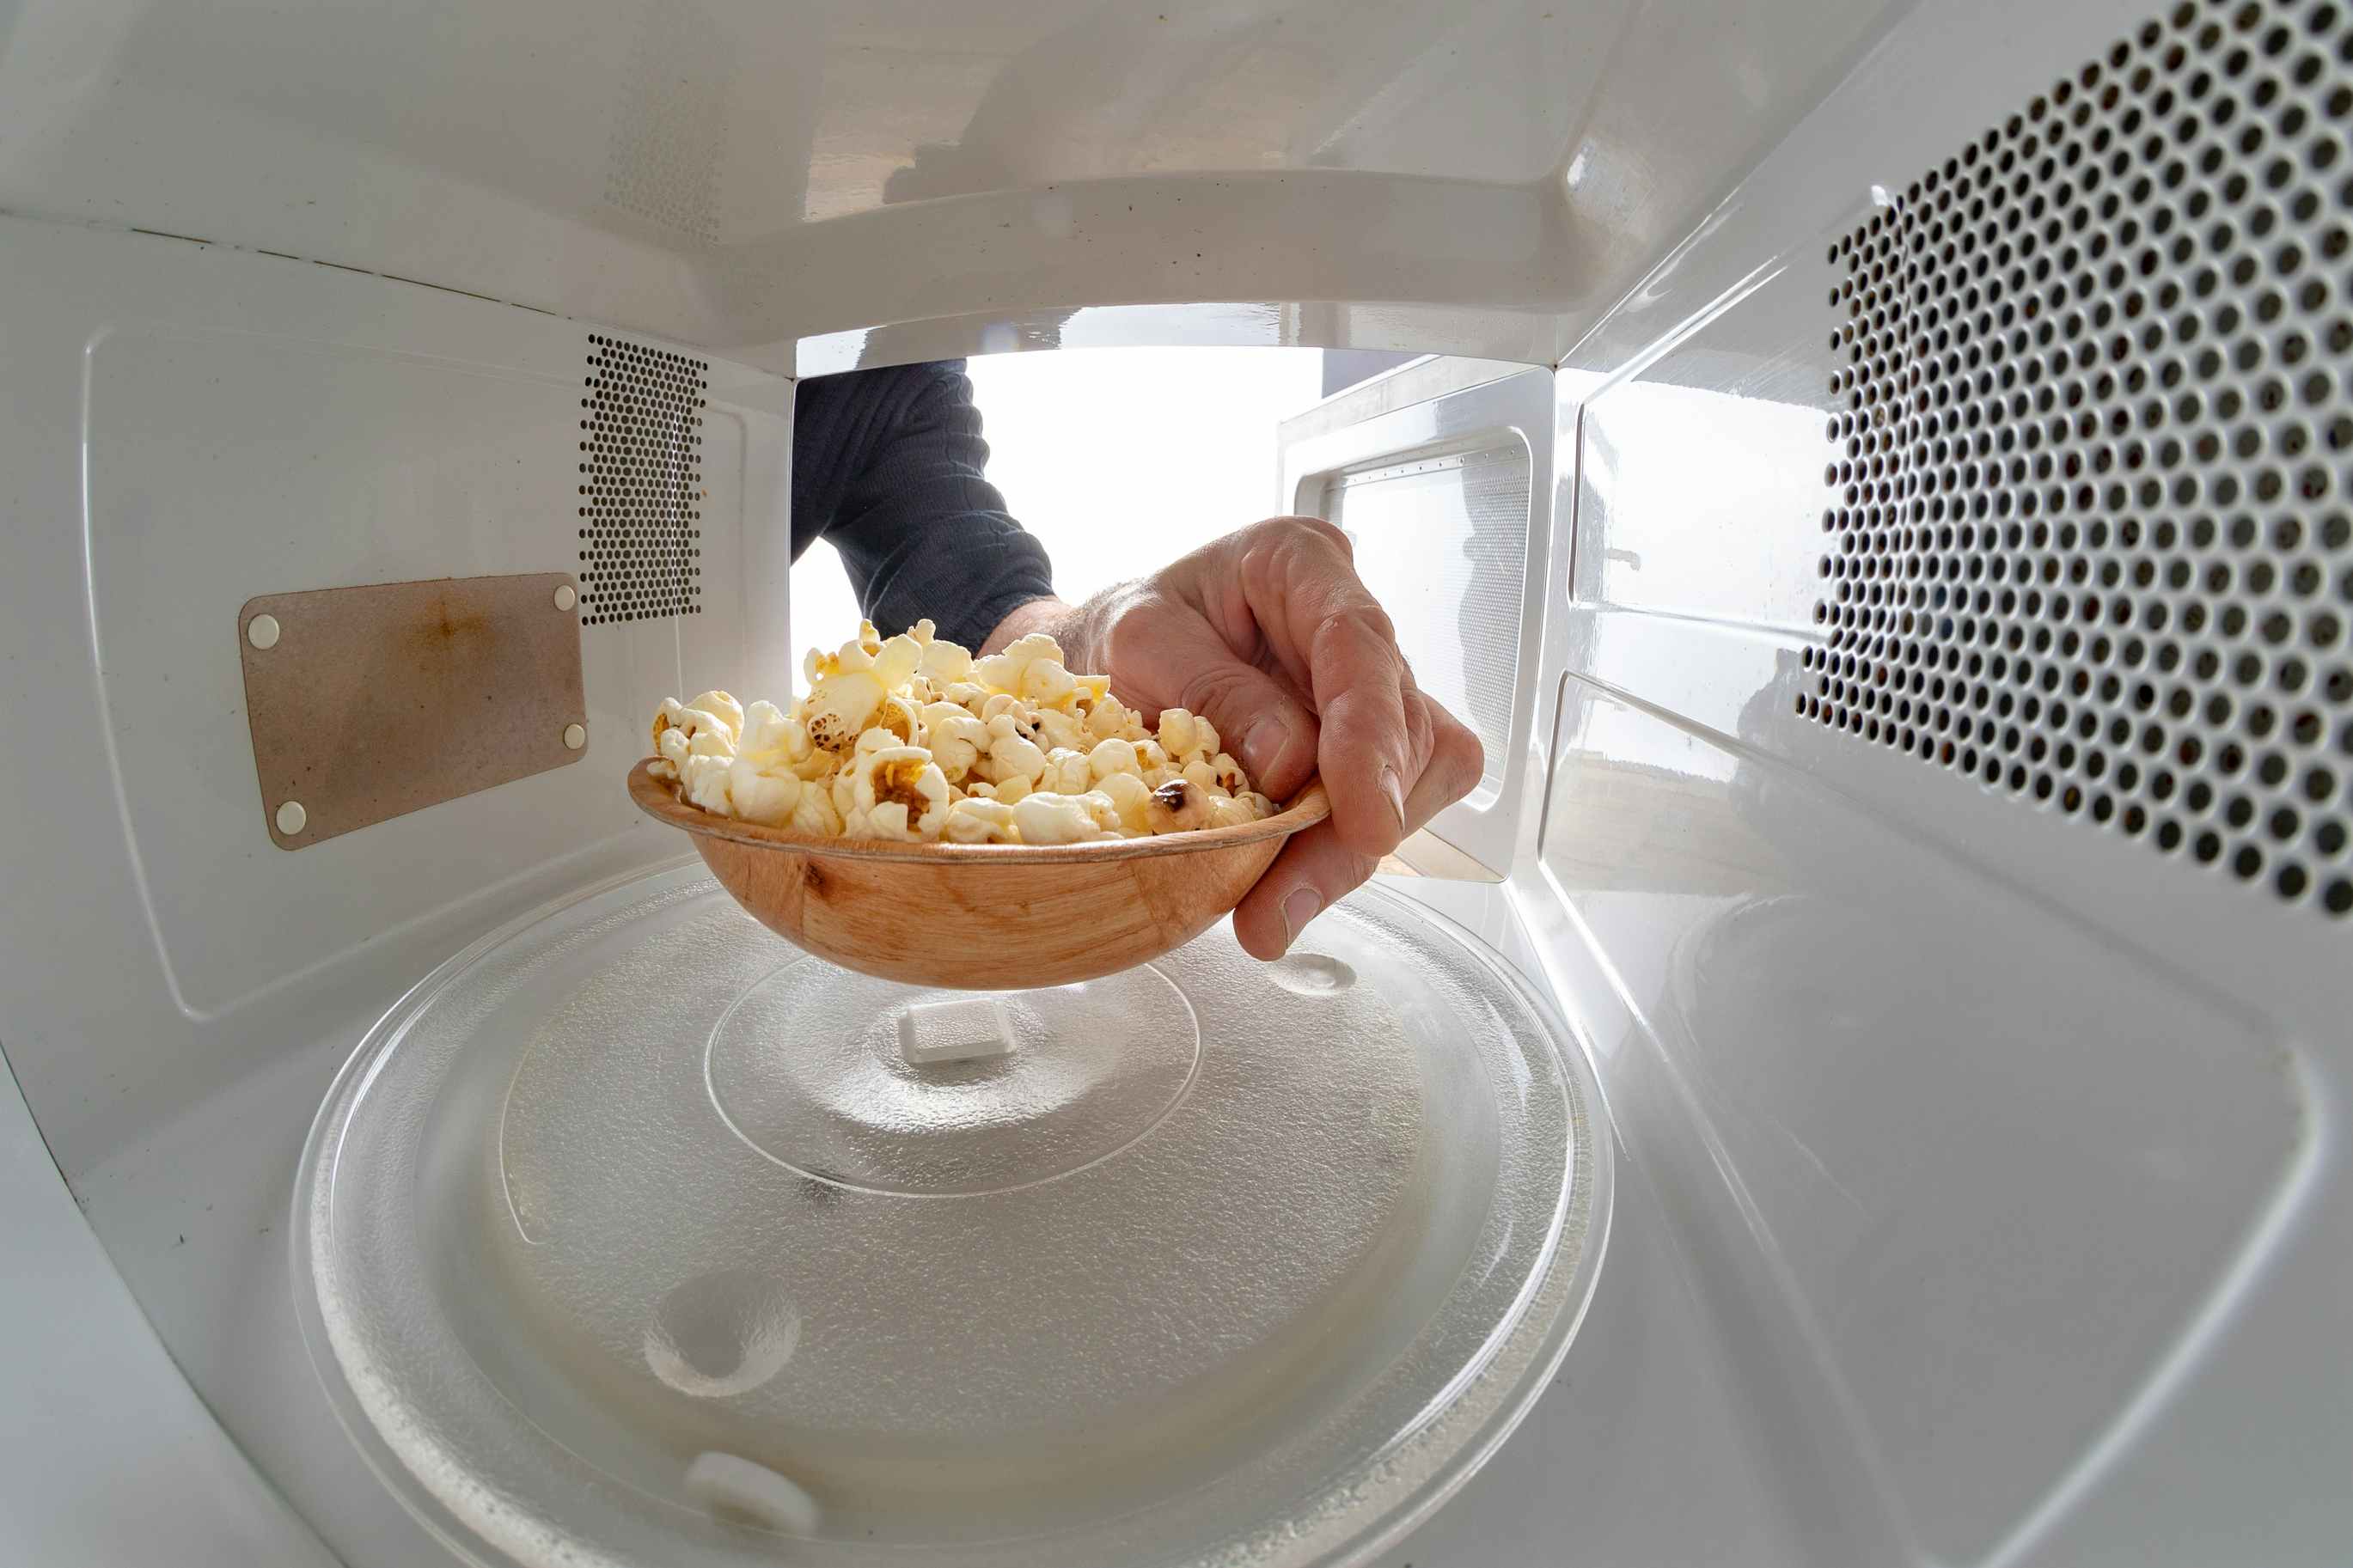 A person placing a bowl of already-popped popcorn into a microwave